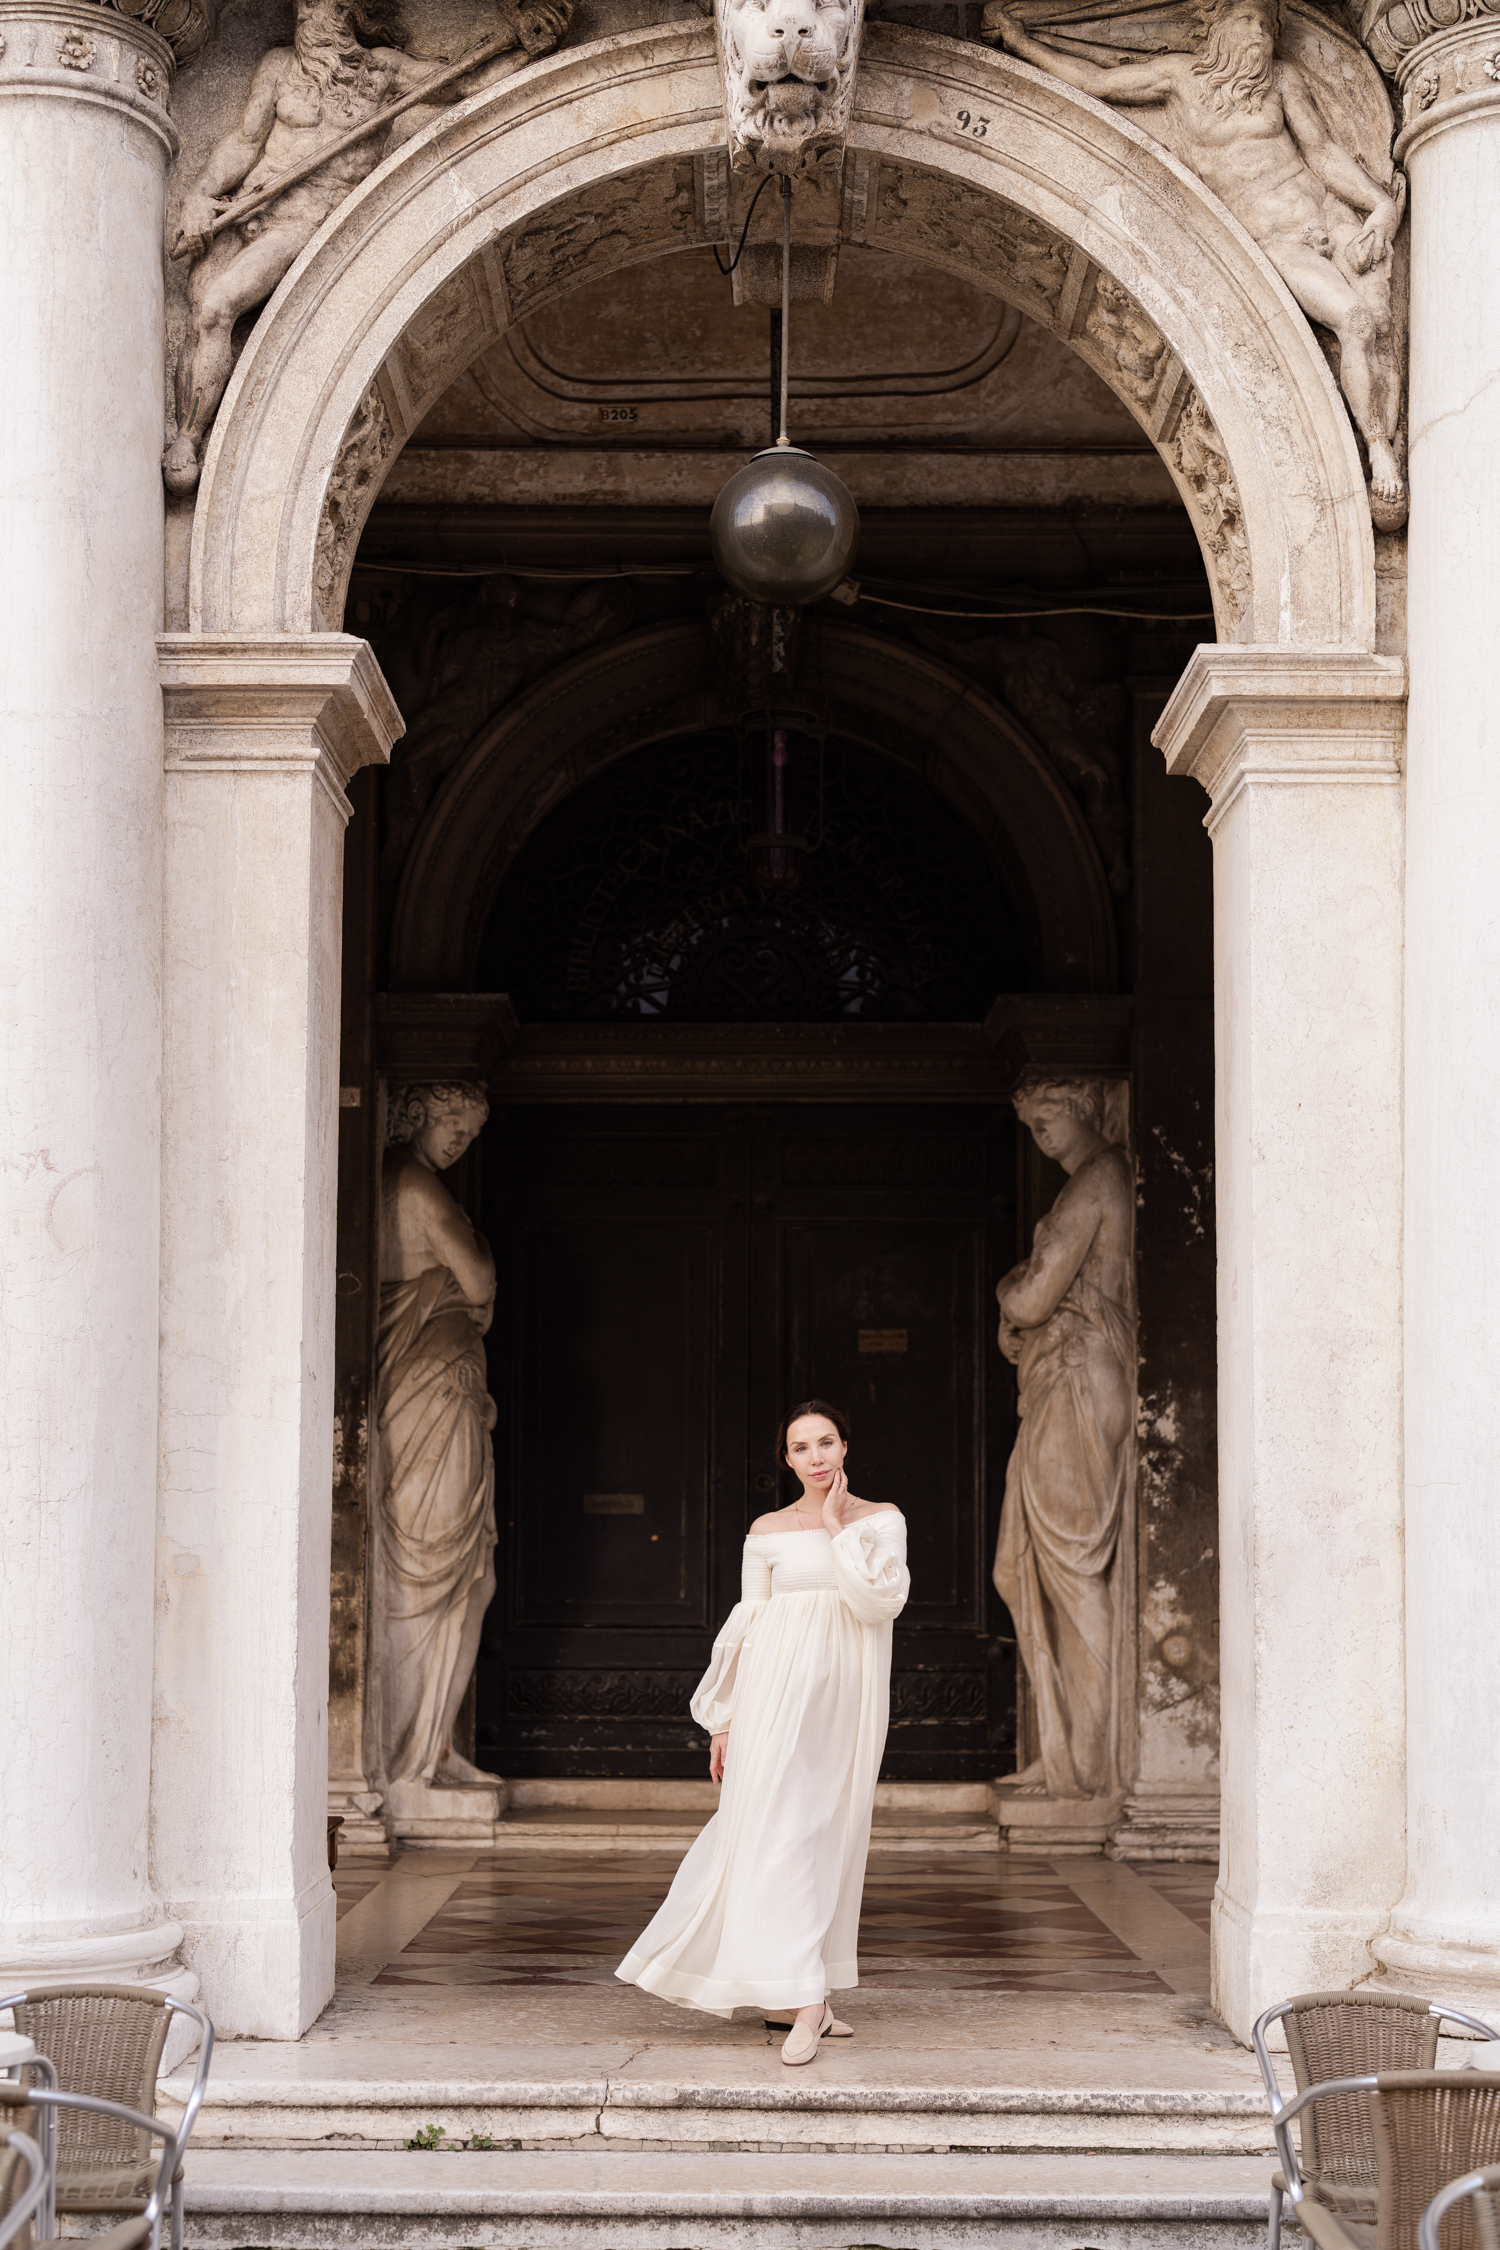 the best Venice photographer for a portrait, couple, anniversary, engagement, or vacation photoshoot in Venice